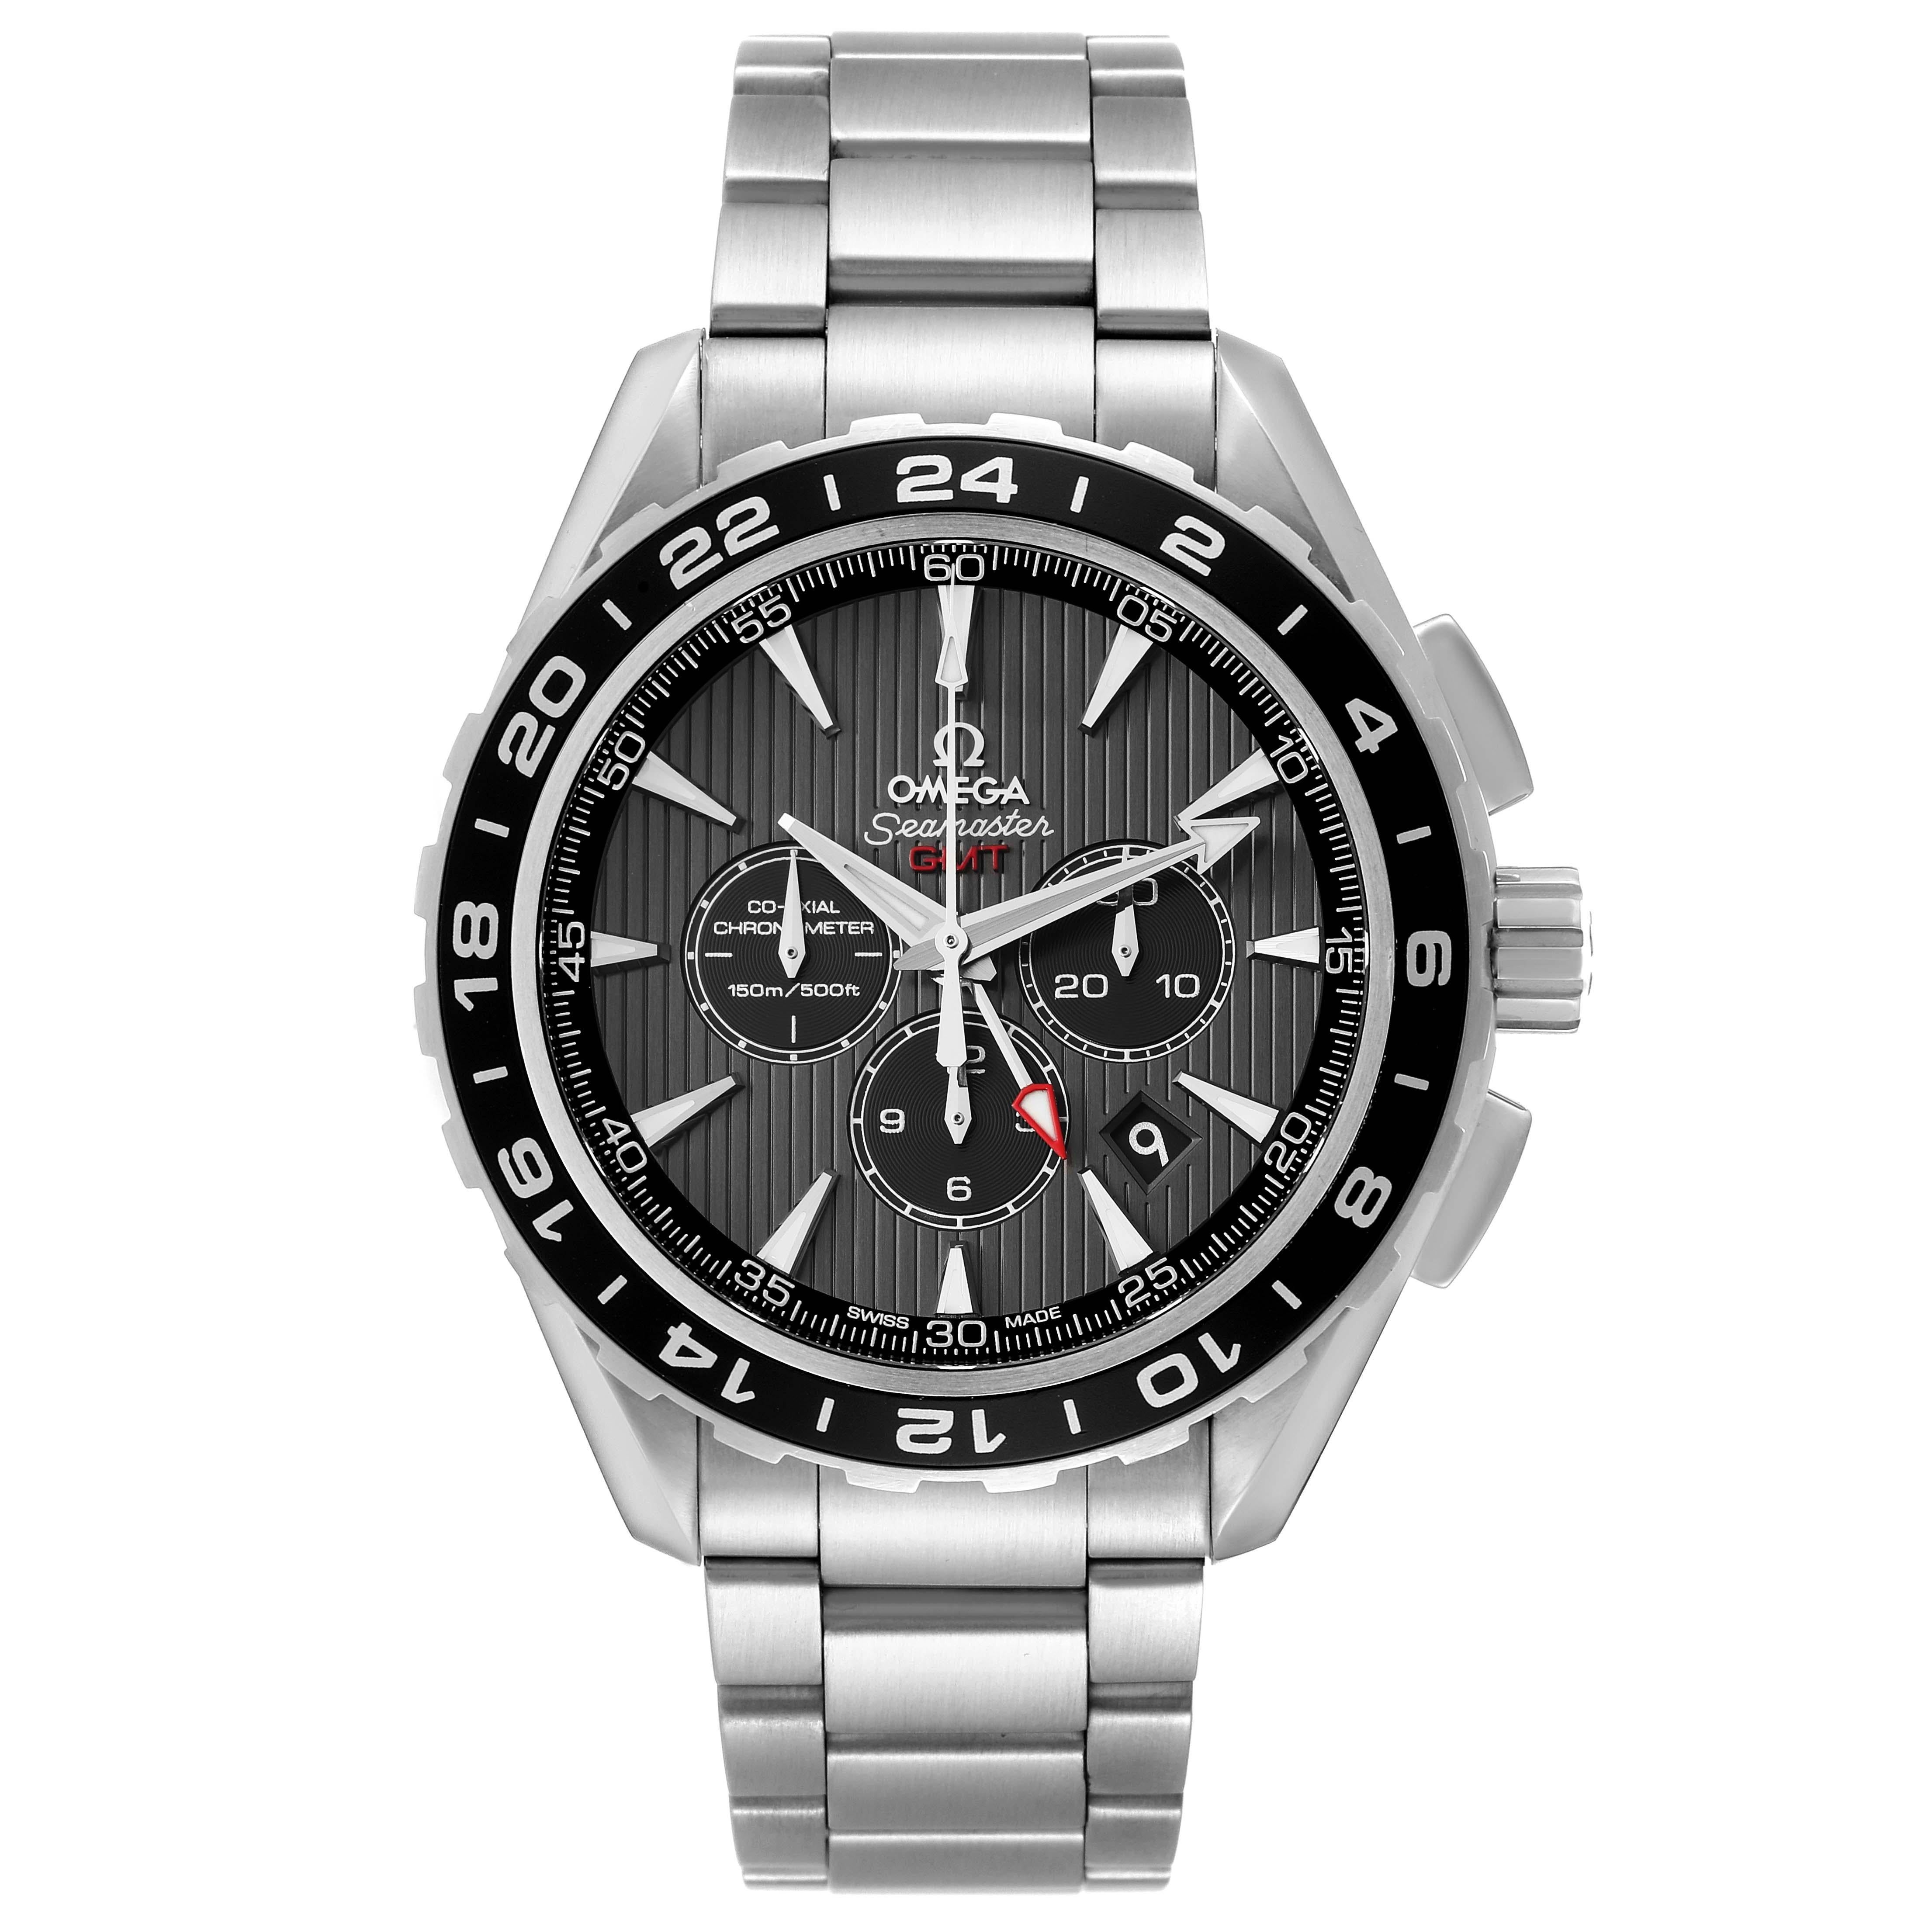 Omega Seamaster Aqua Terra GMT Steel Mens Watch 231.13.44.52.06.001 Box Card. Automatic self-winding chronograph movement with column wheel mechanism, free sprung-balance and Co-Axial Escapement for greater precision and durability. Rhodium plated